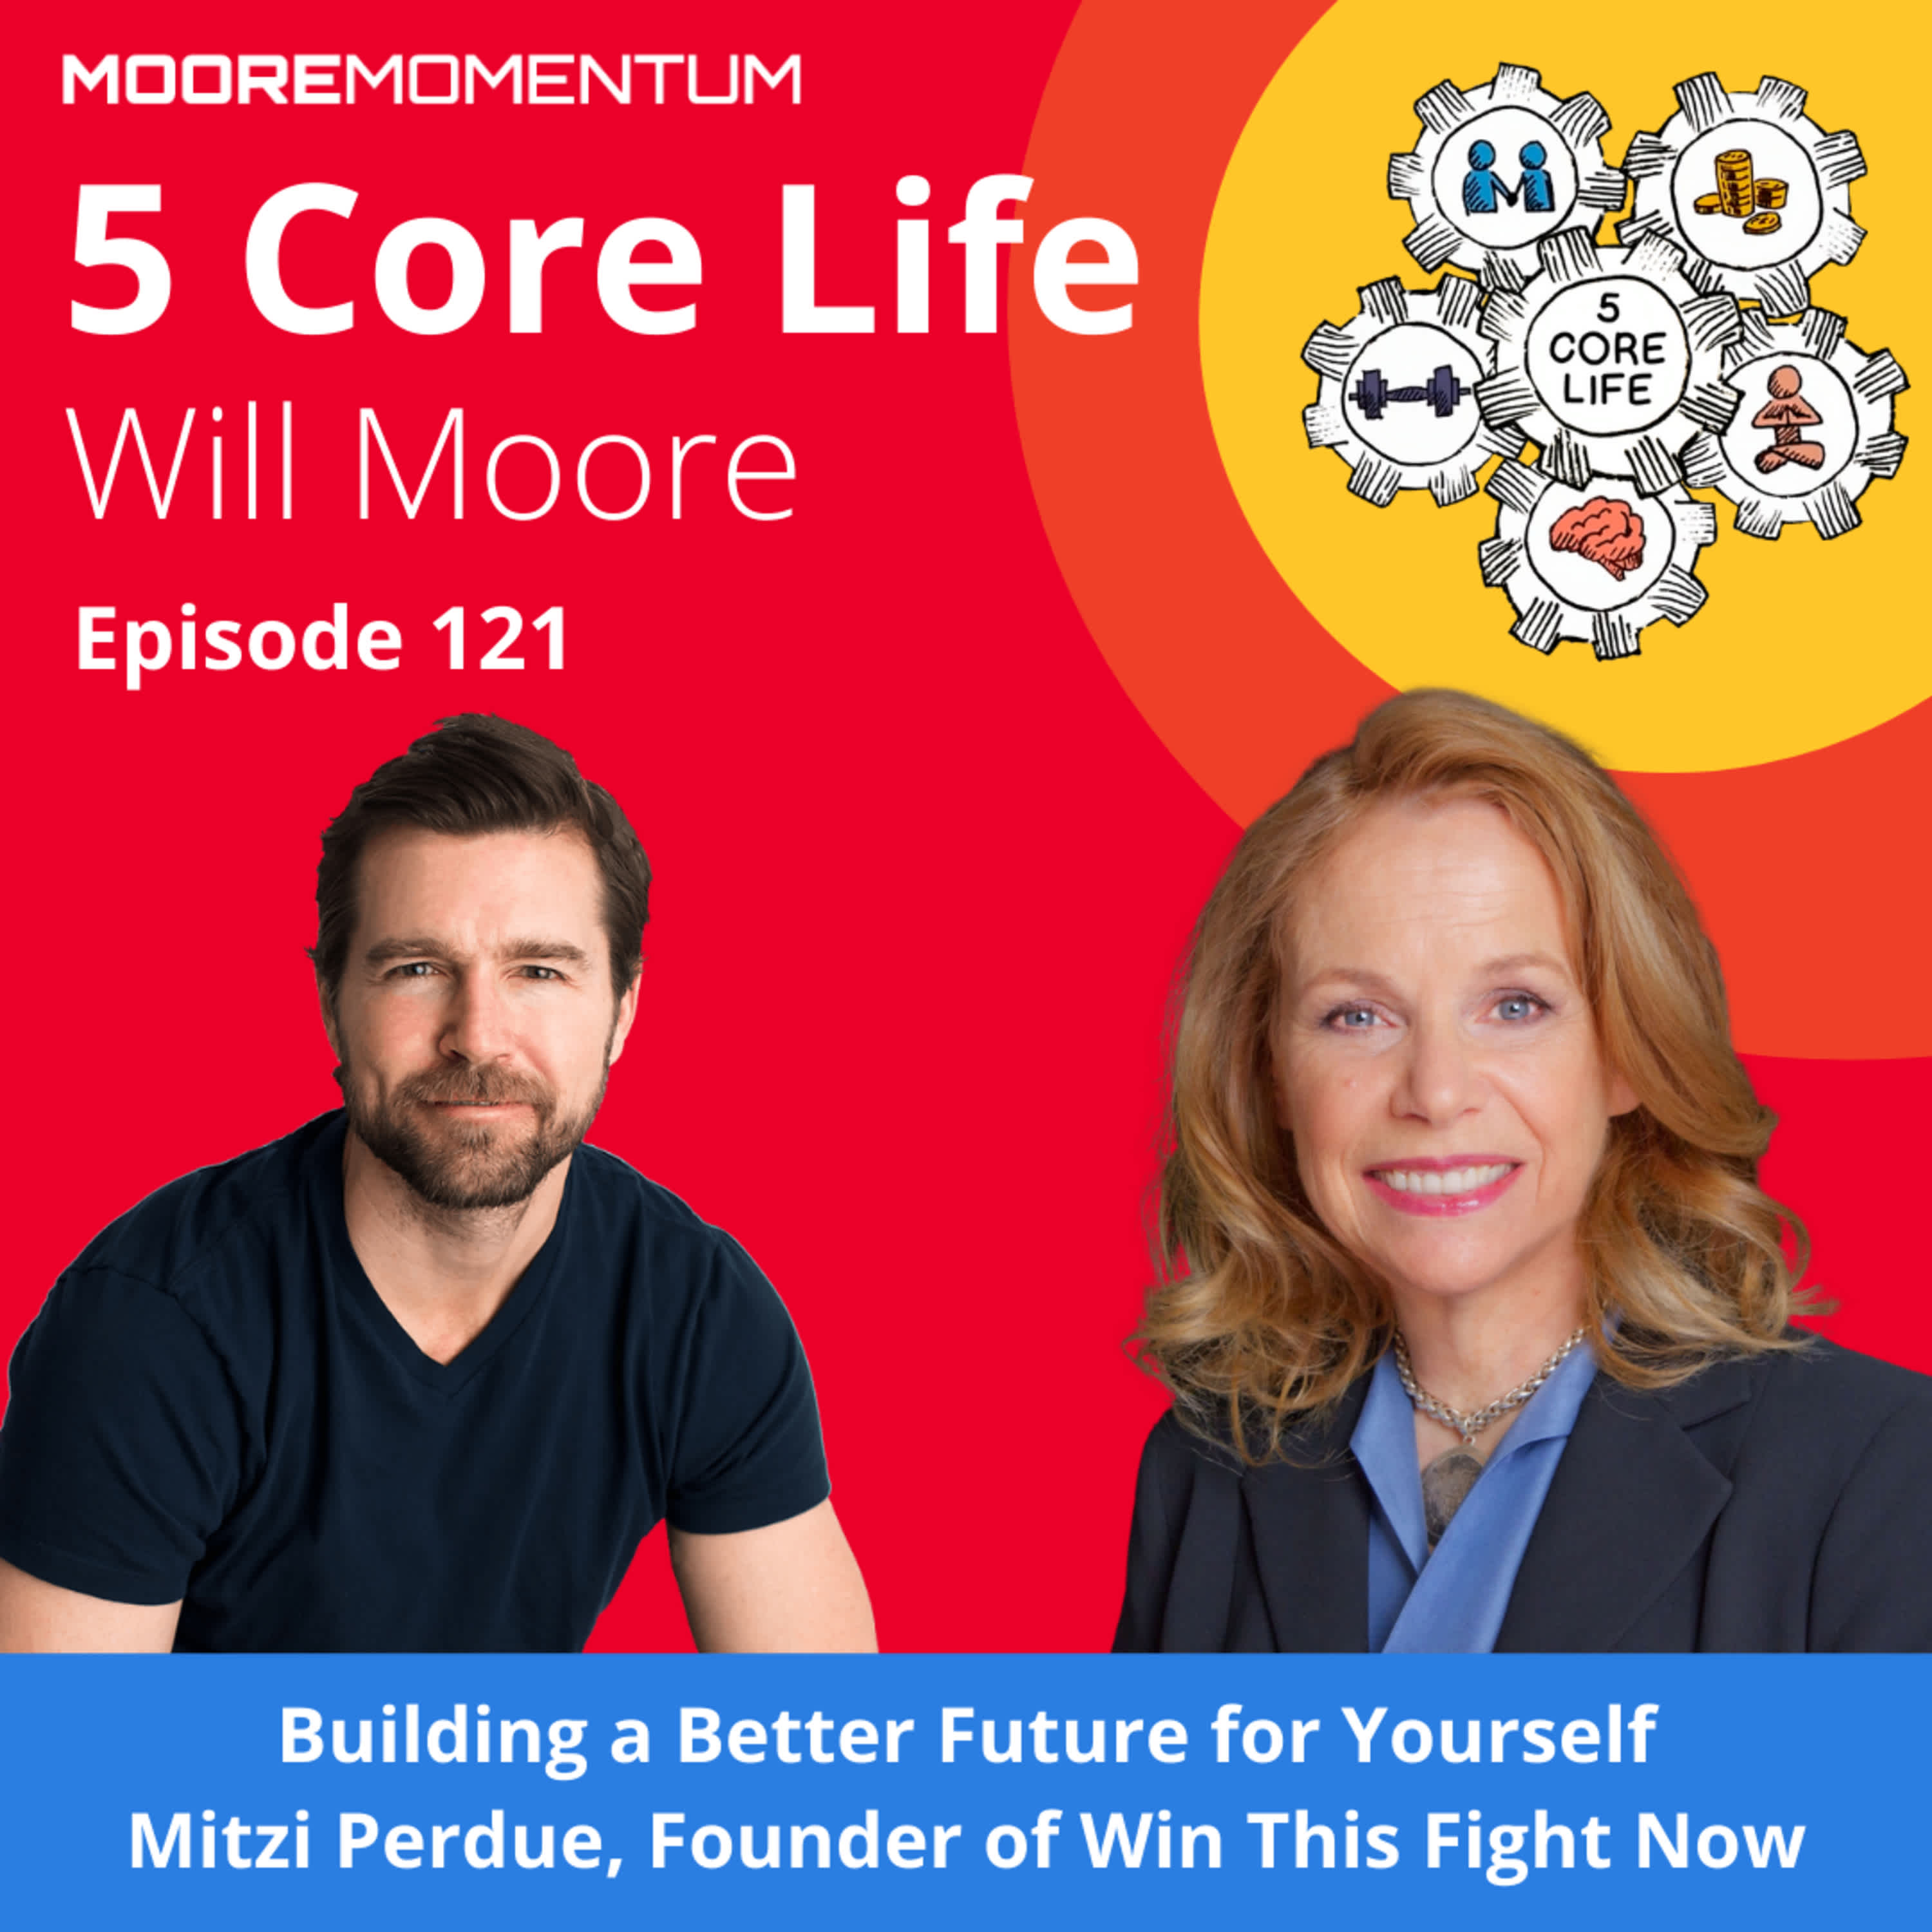 Building a Better Future For Yourself, How to Improve Your Life | Mitzi Perdue